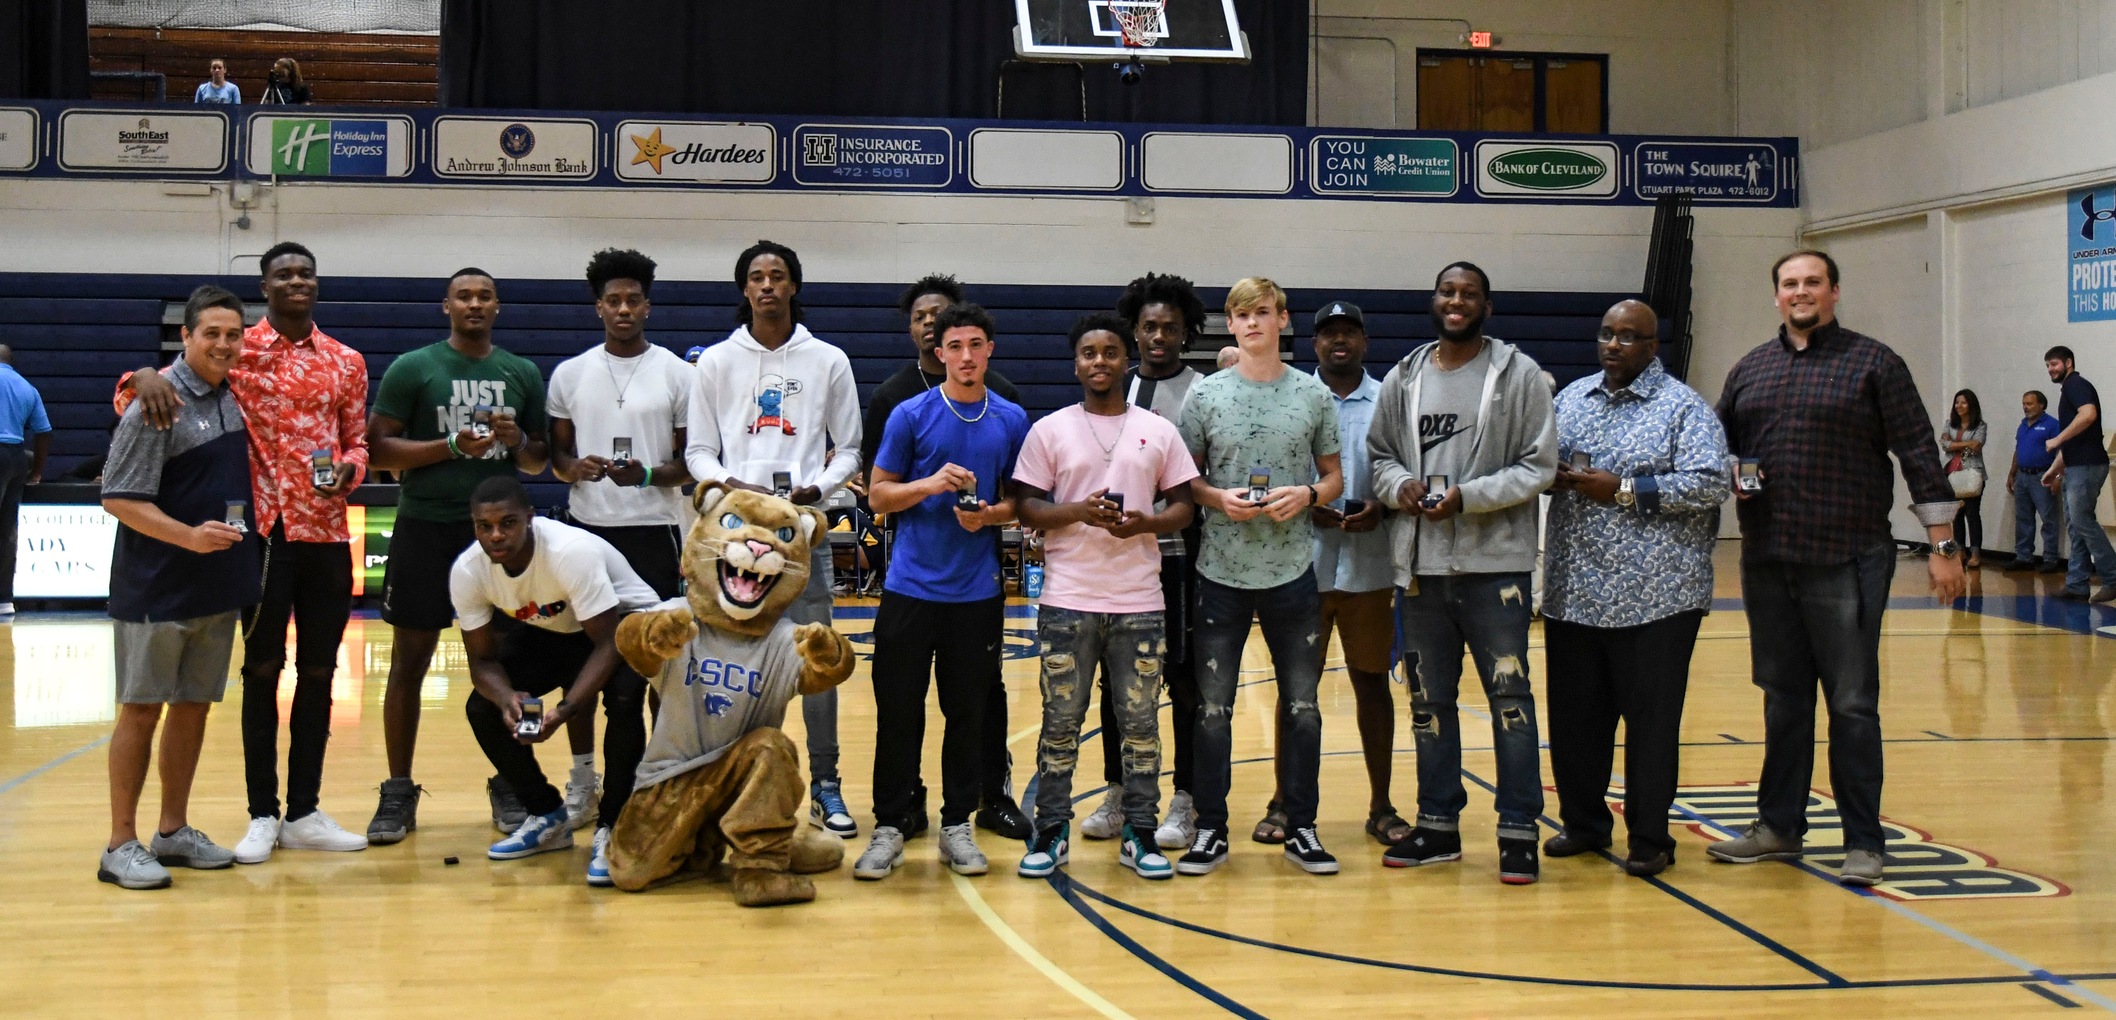 Men's Basketball Distributes Championship Rings In Special Ceremony